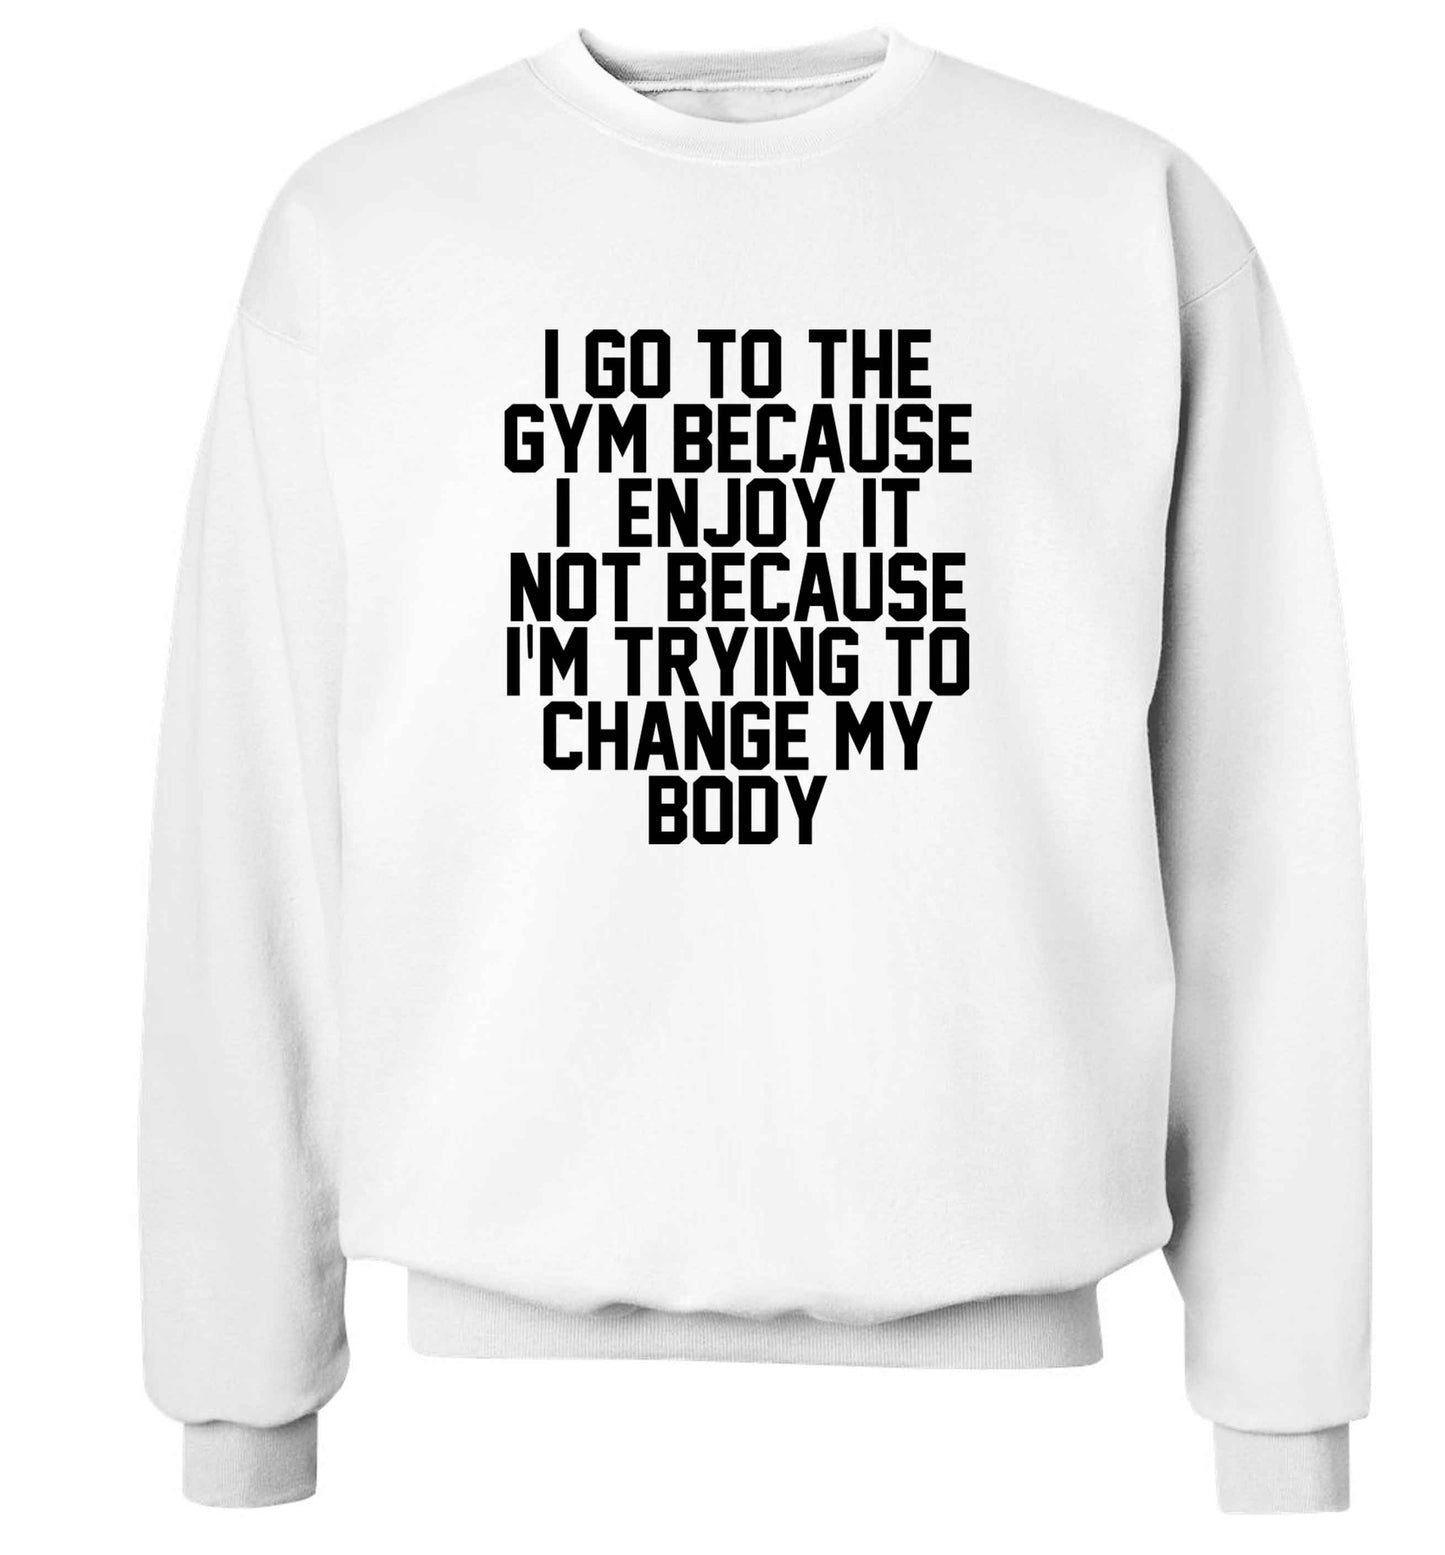 I go to the gym because I enjoy it not because I'm trying to change my body adult's unisex white sweater 2XL